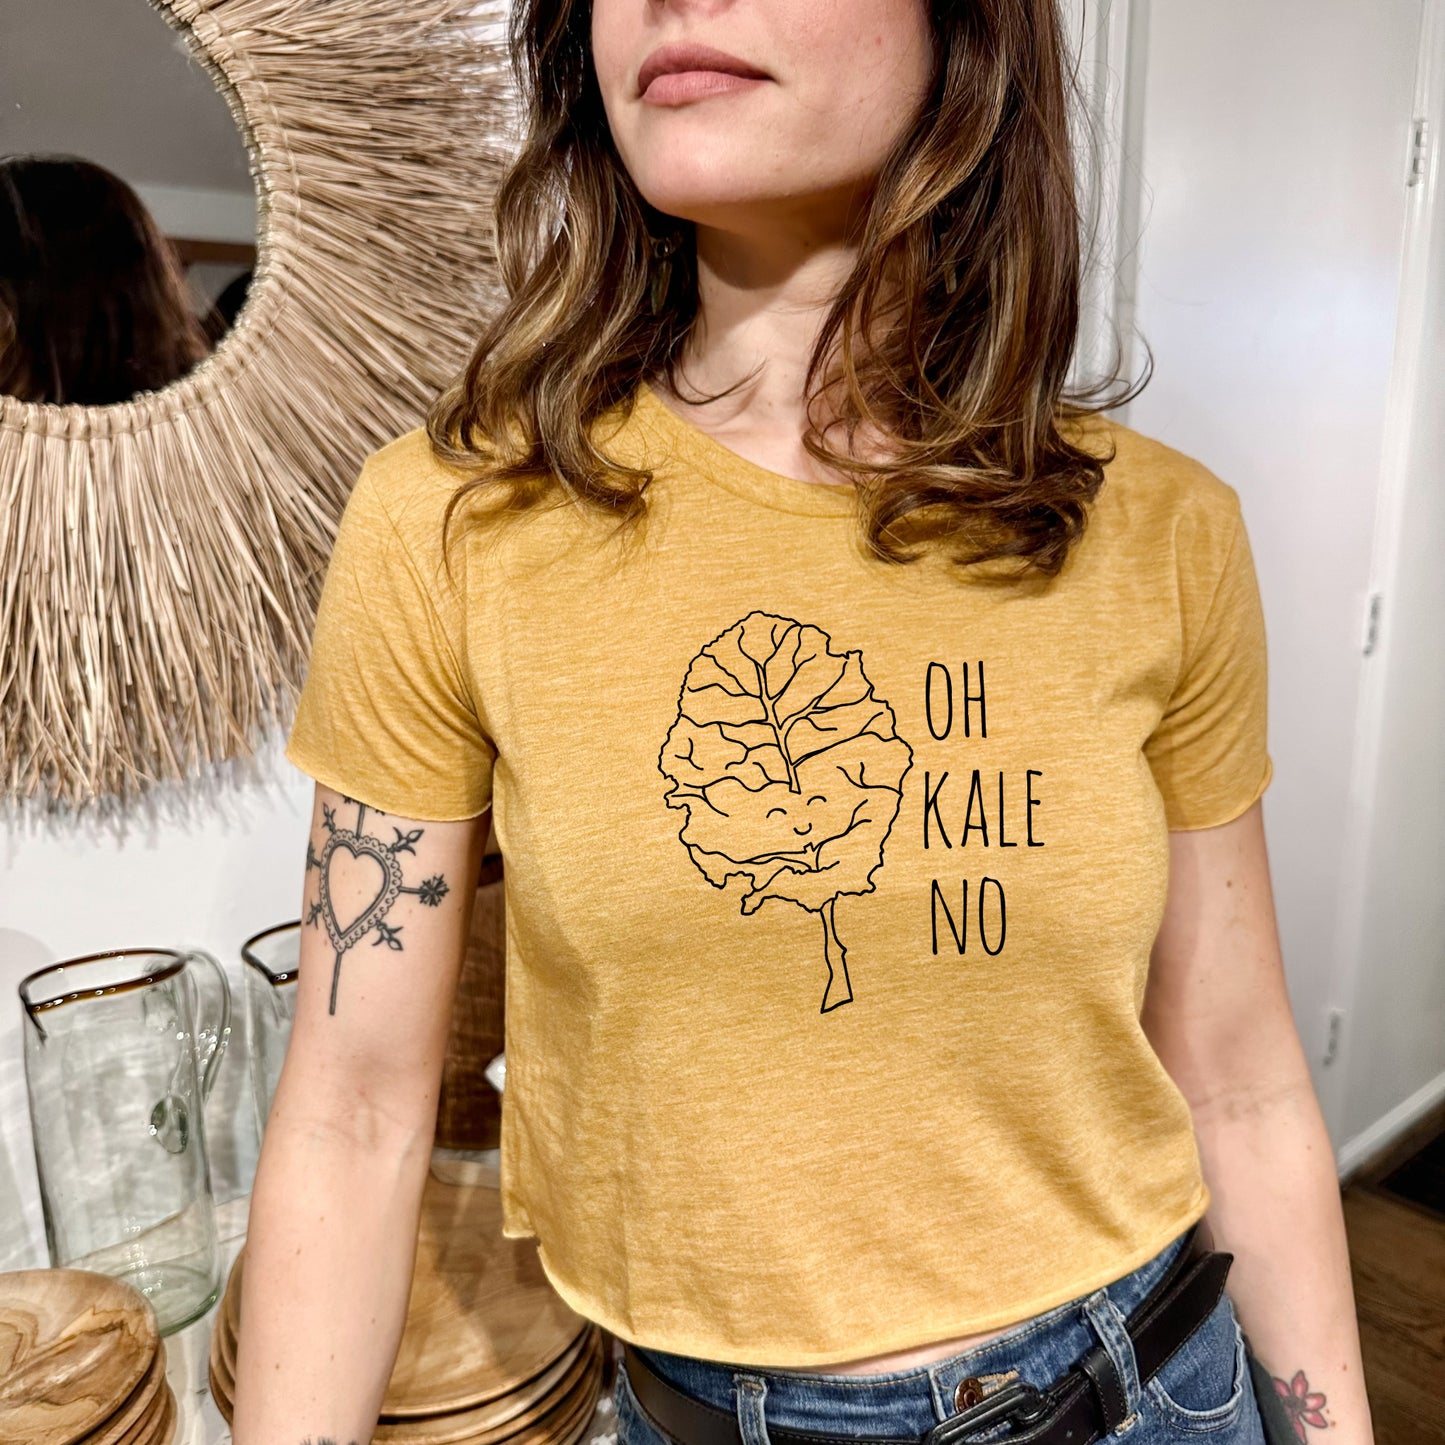 Oh Kale No - Women's Crop Tee - Heather Gray or Gold